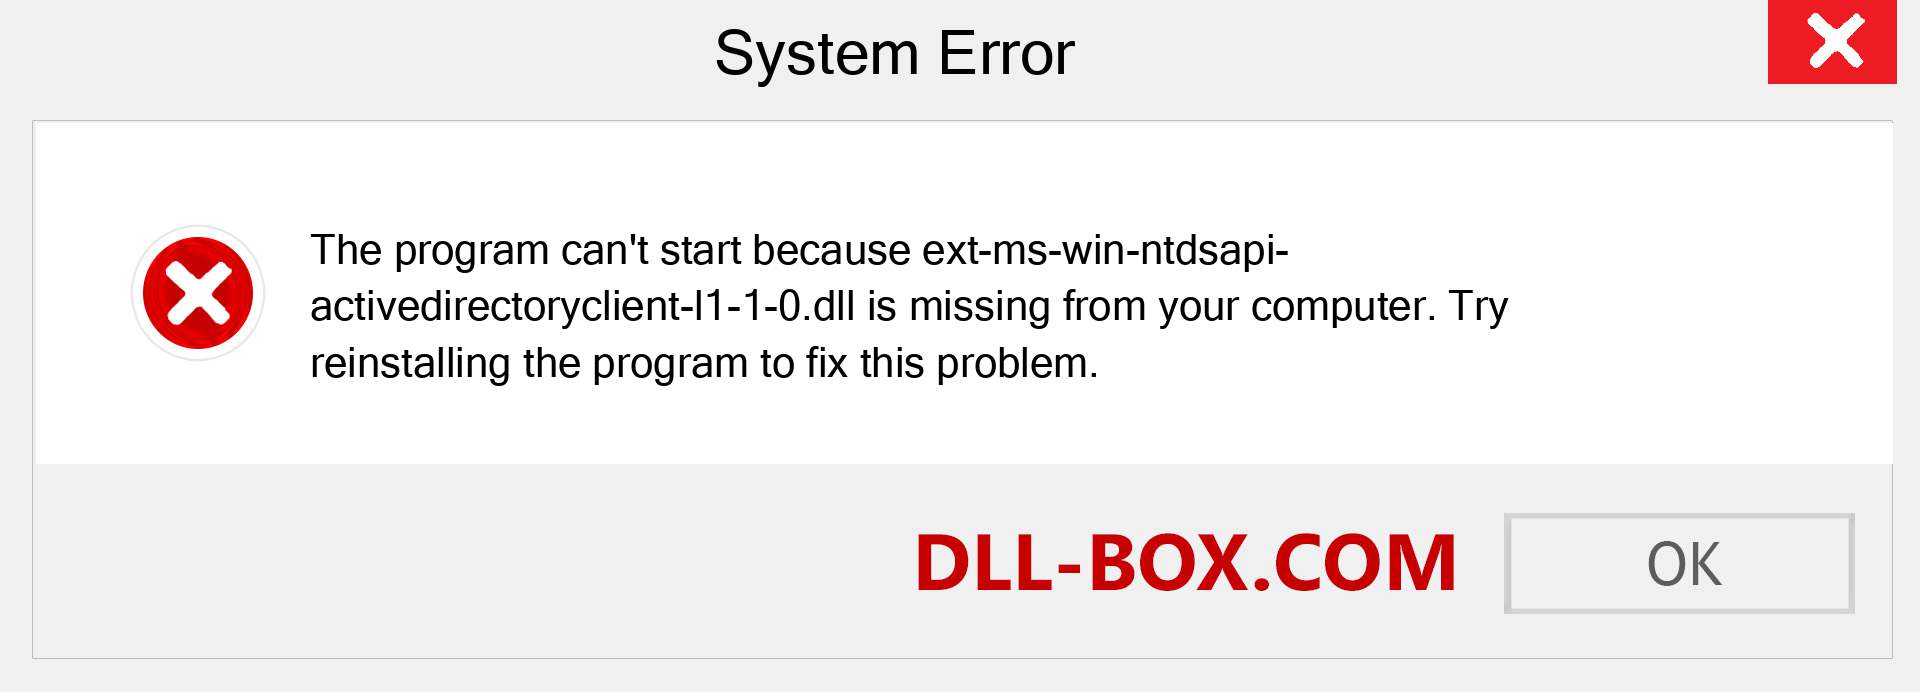  ext-ms-win-ntdsapi-activedirectoryclient-l1-1-0.dll file is missing?. Download for Windows 7, 8, 10 - Fix  ext-ms-win-ntdsapi-activedirectoryclient-l1-1-0 dll Missing Error on Windows, photos, images